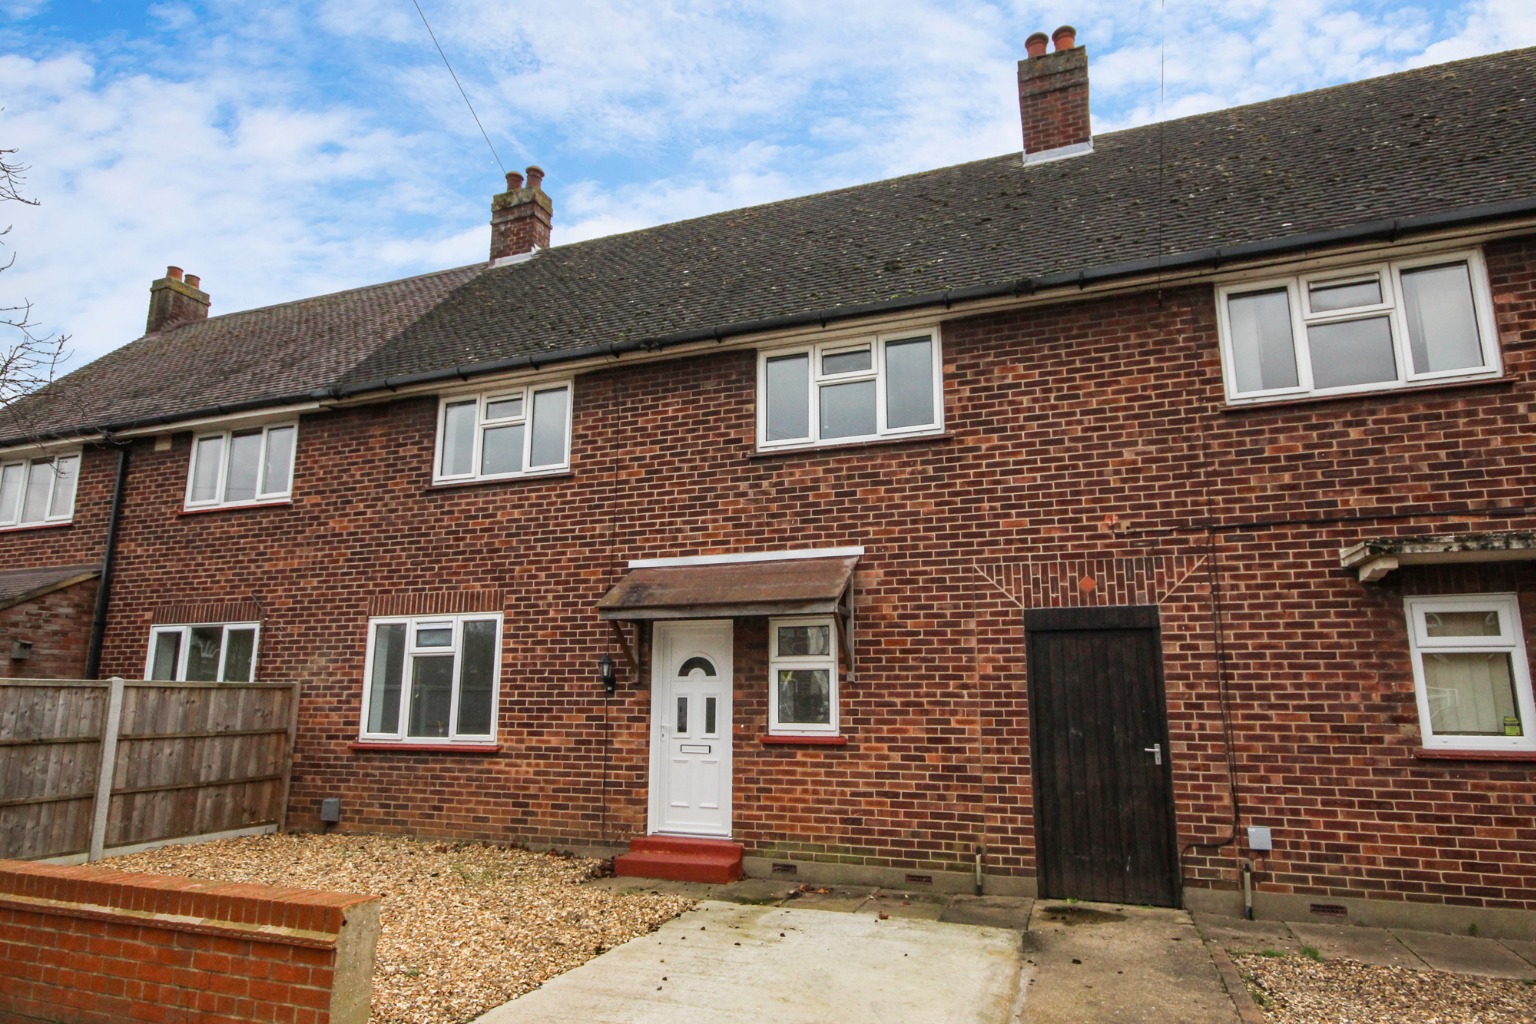 3 bed terraced house for sale in Bedford - Property Image 1